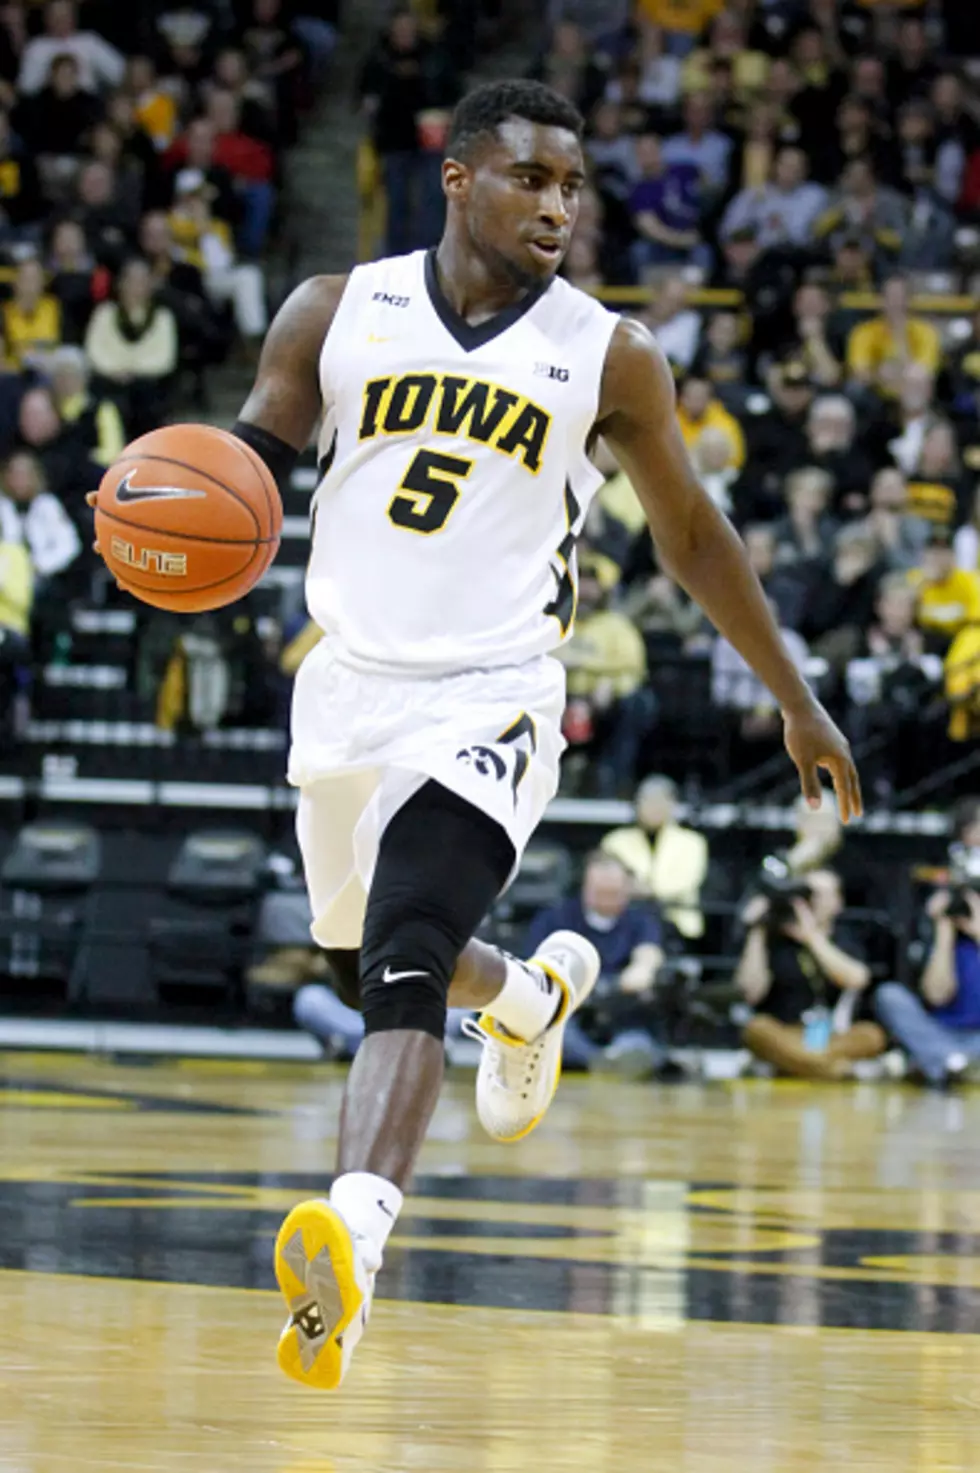 Iowa Up To 4th In The Latest AP Basketball Poll